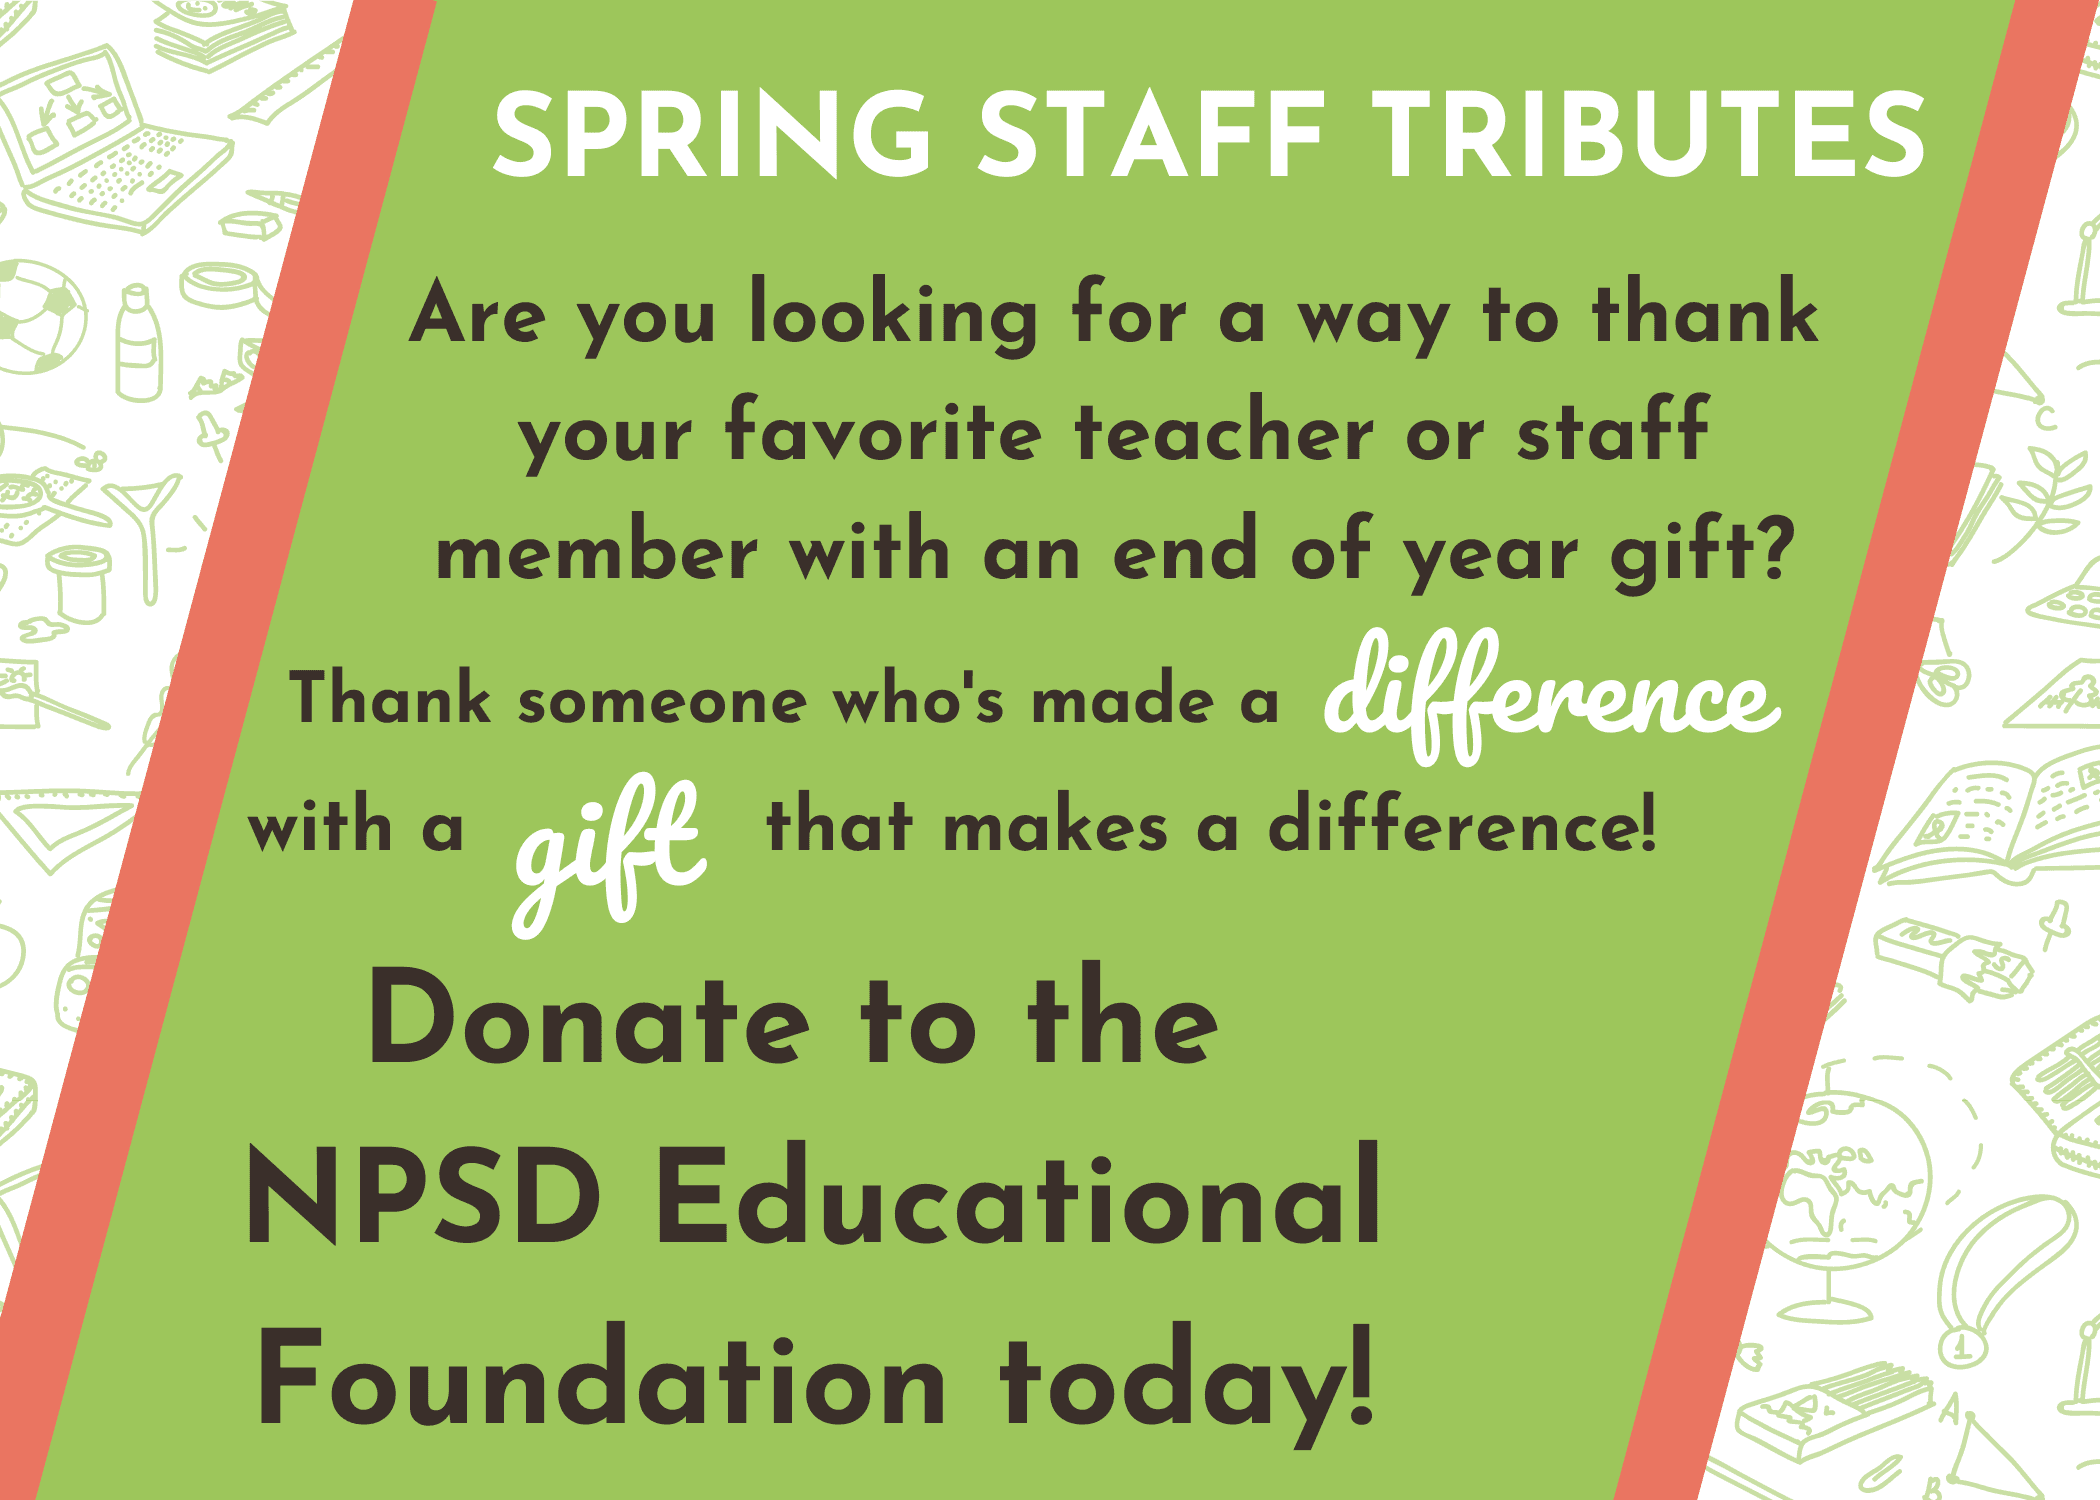 Thank a North Penn staff member who has made a difference with a gift that makes a difference!